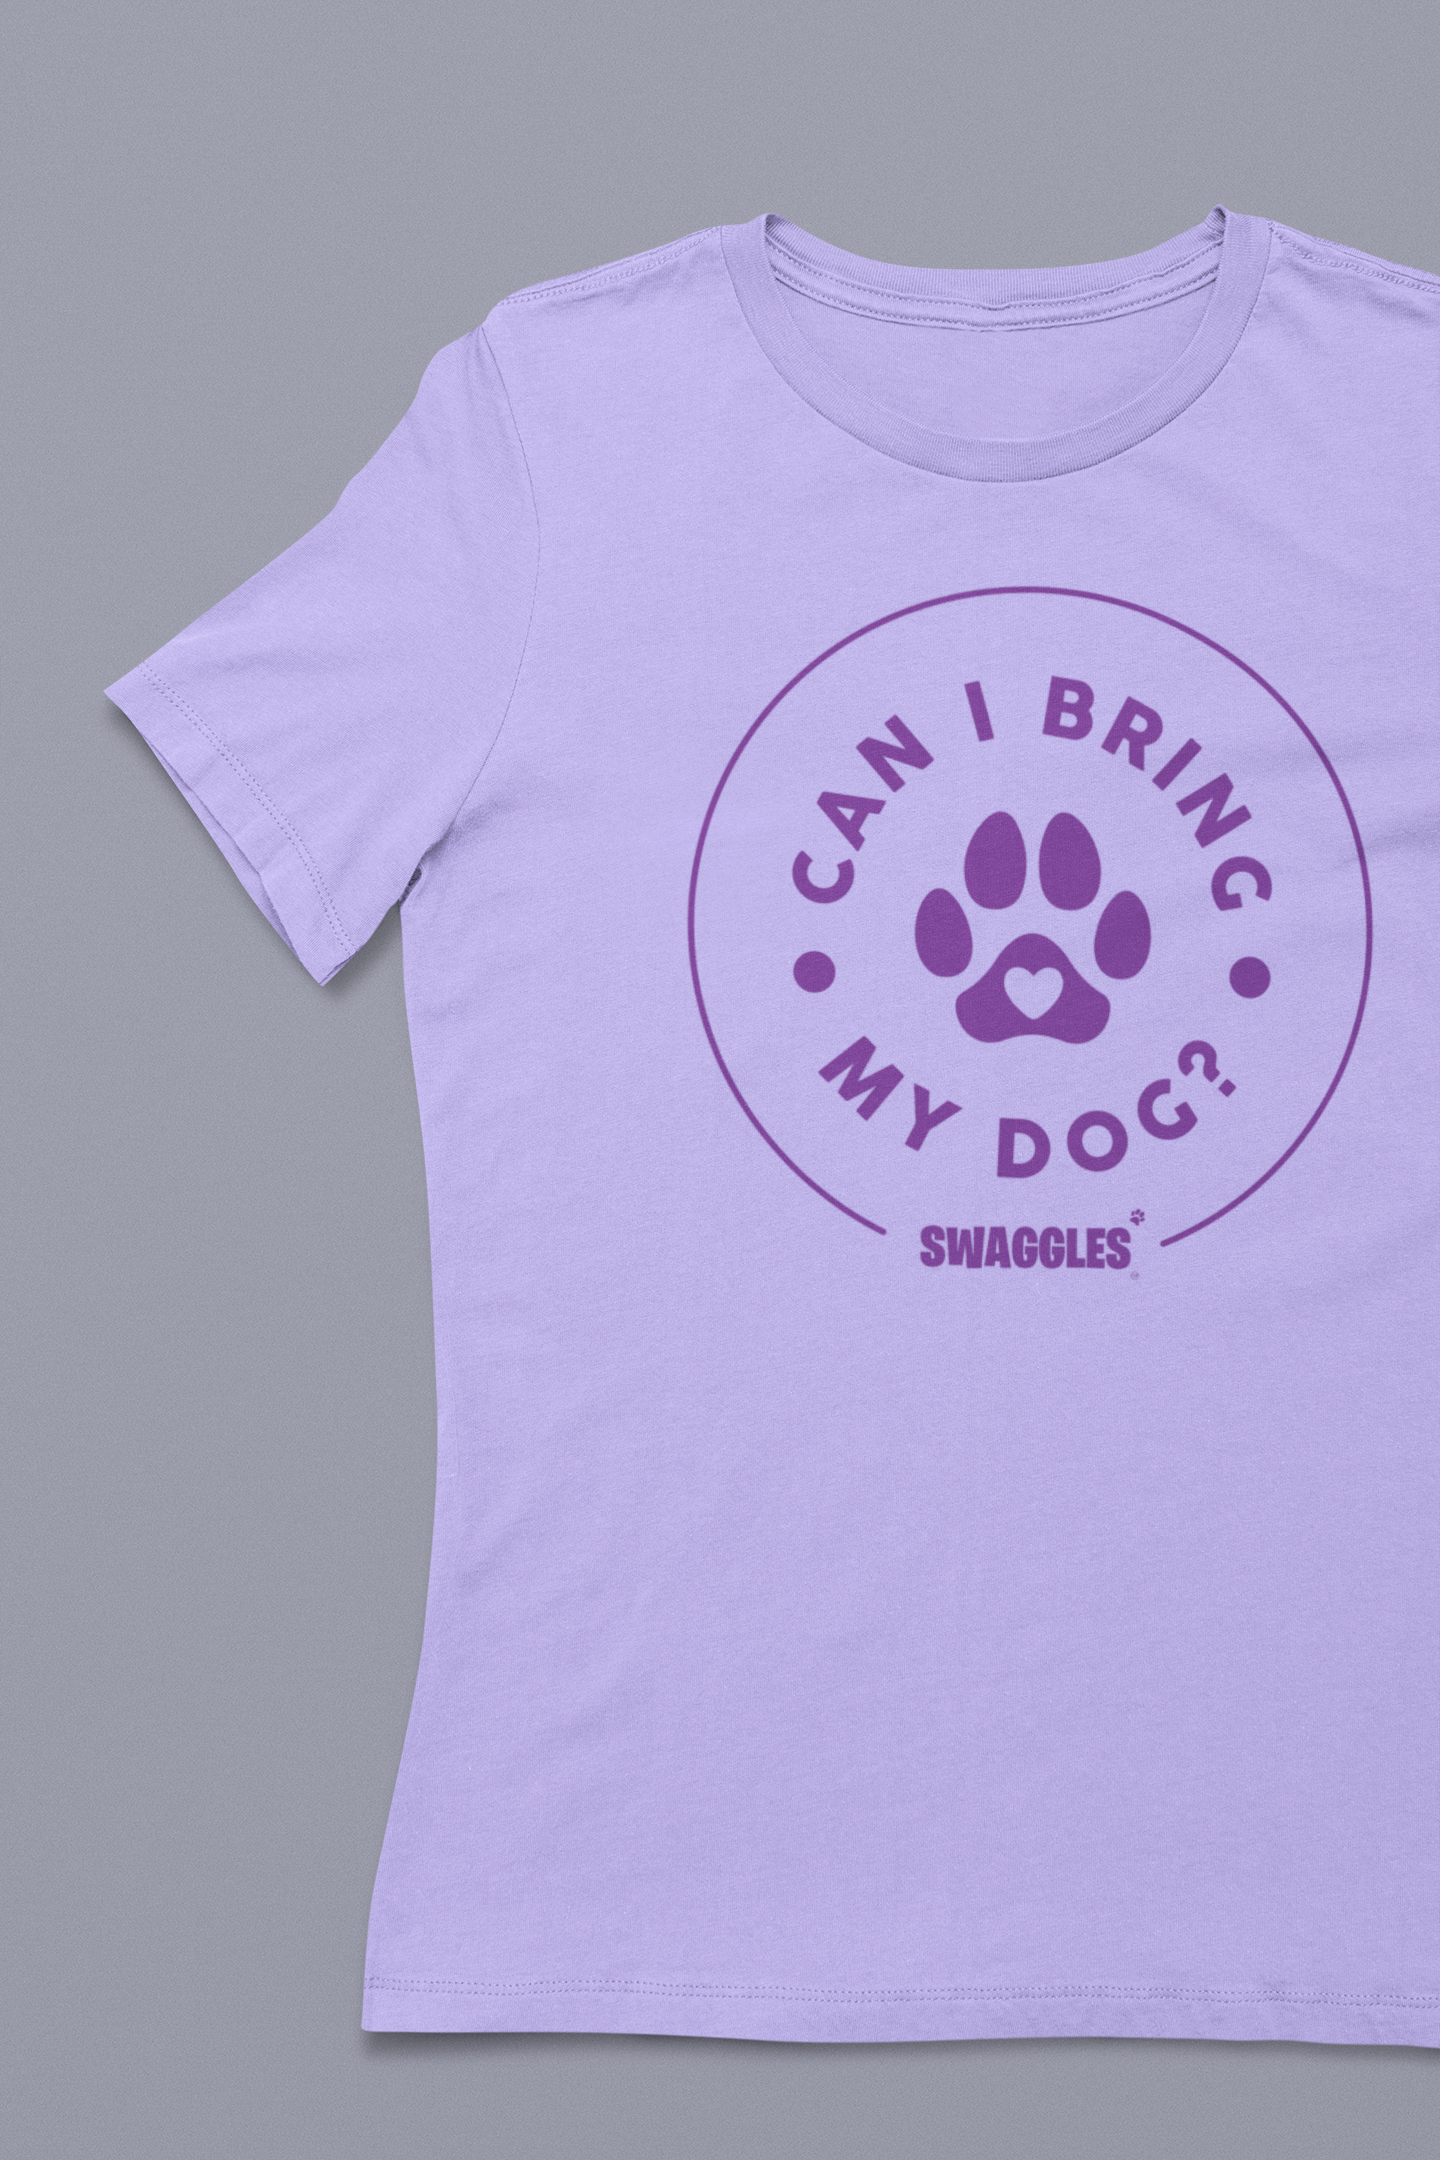 "Can I Bring My Dog?" - Paw Design - Women's Crew Neck Tee